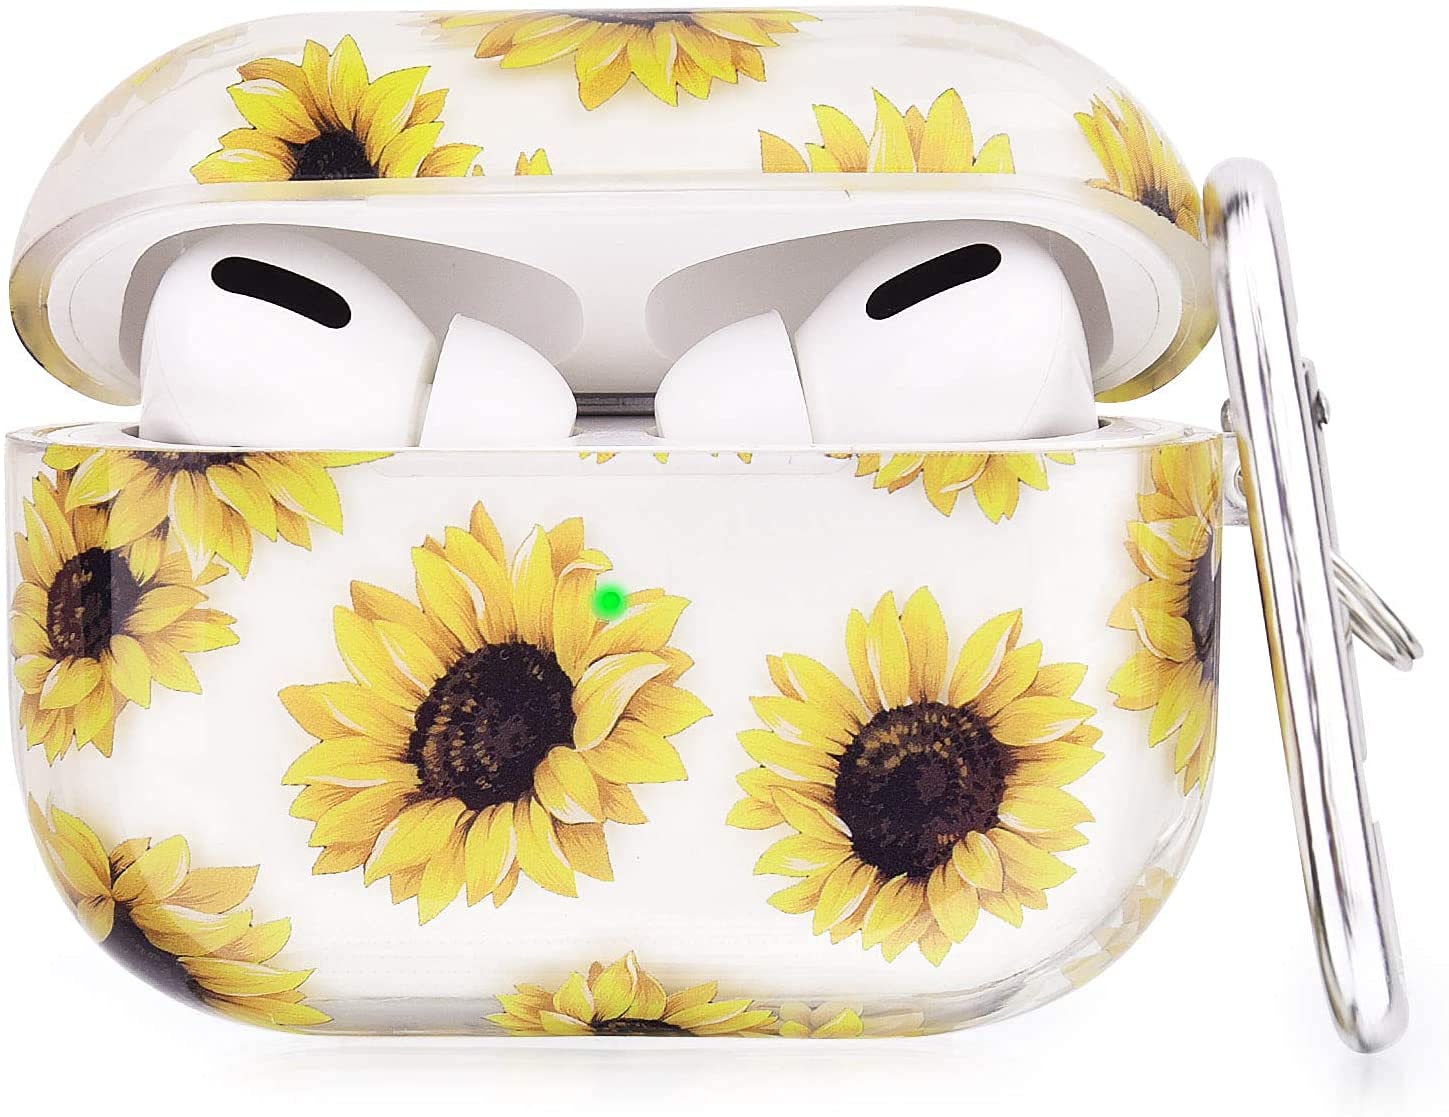 Apple Airpod Pro Case - Cute Flowers & Boho Floral Design Protective Shockproof Clear Silicone Cover With Clip Keychain - Supports Wireless Qi Charging for Airpods Pro Generation 1 - Sunflower Clear